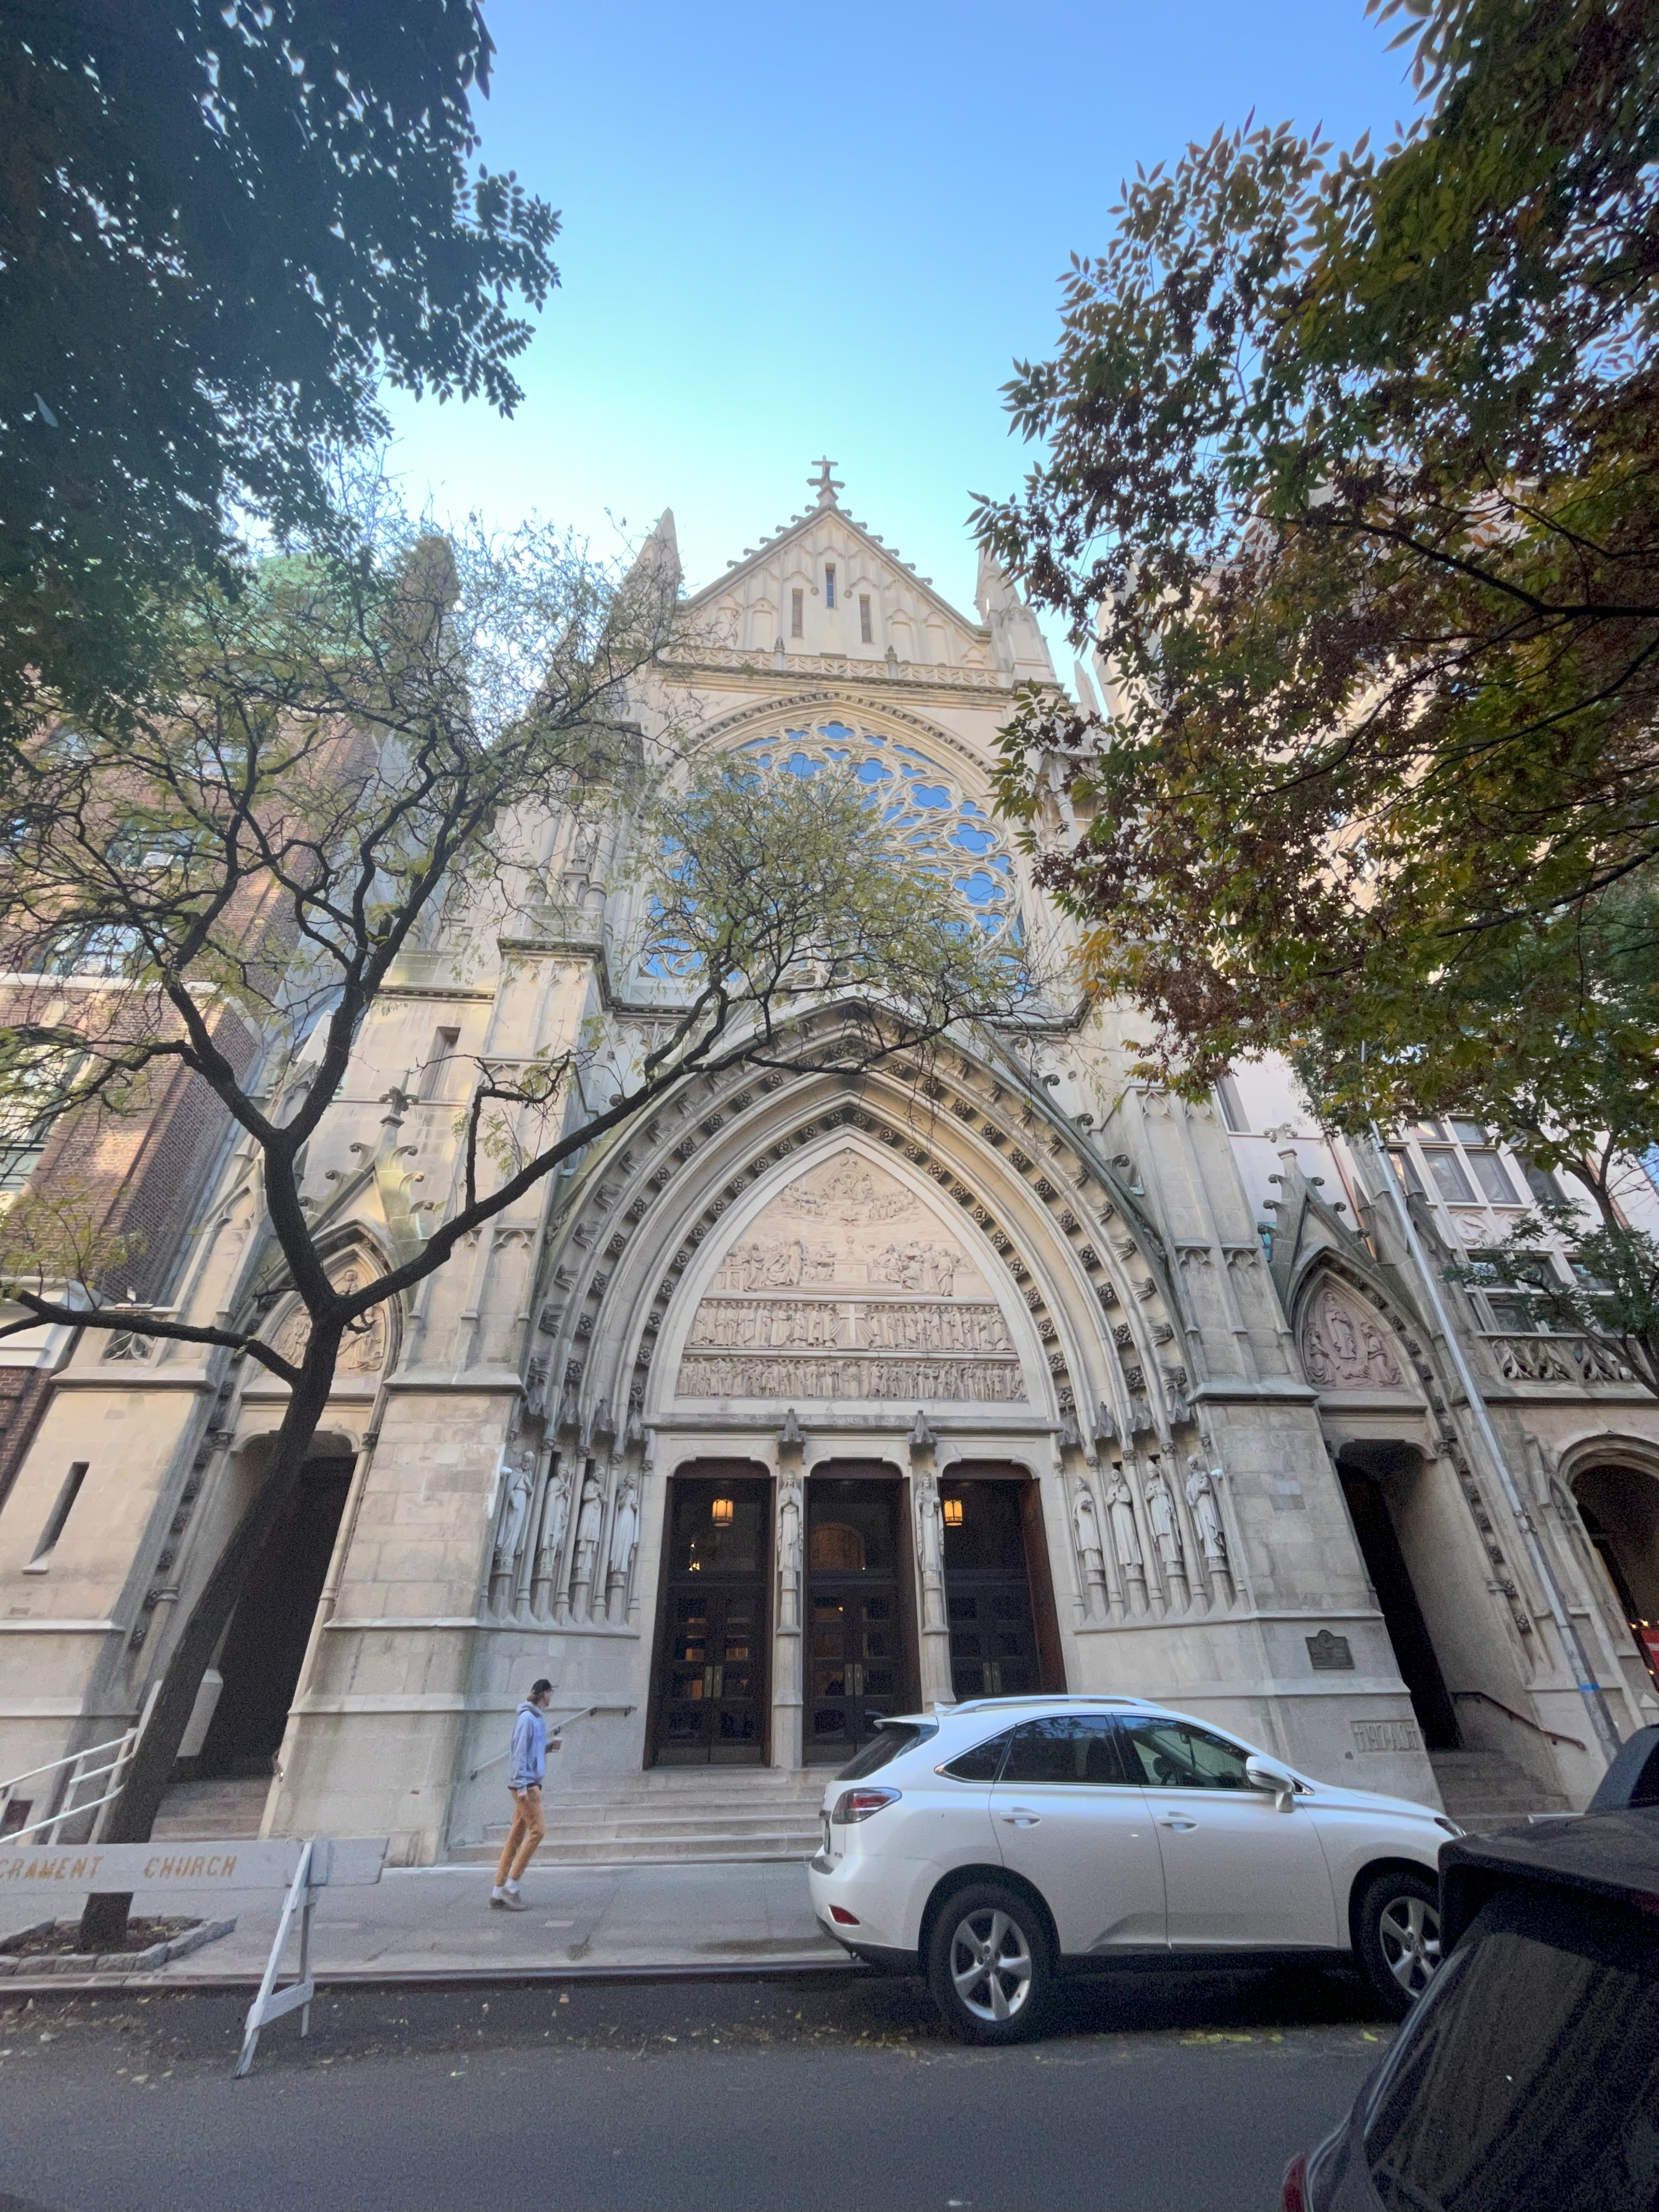 146-150 & 152 West 71st Street (Church of the Blessed Sacrament)